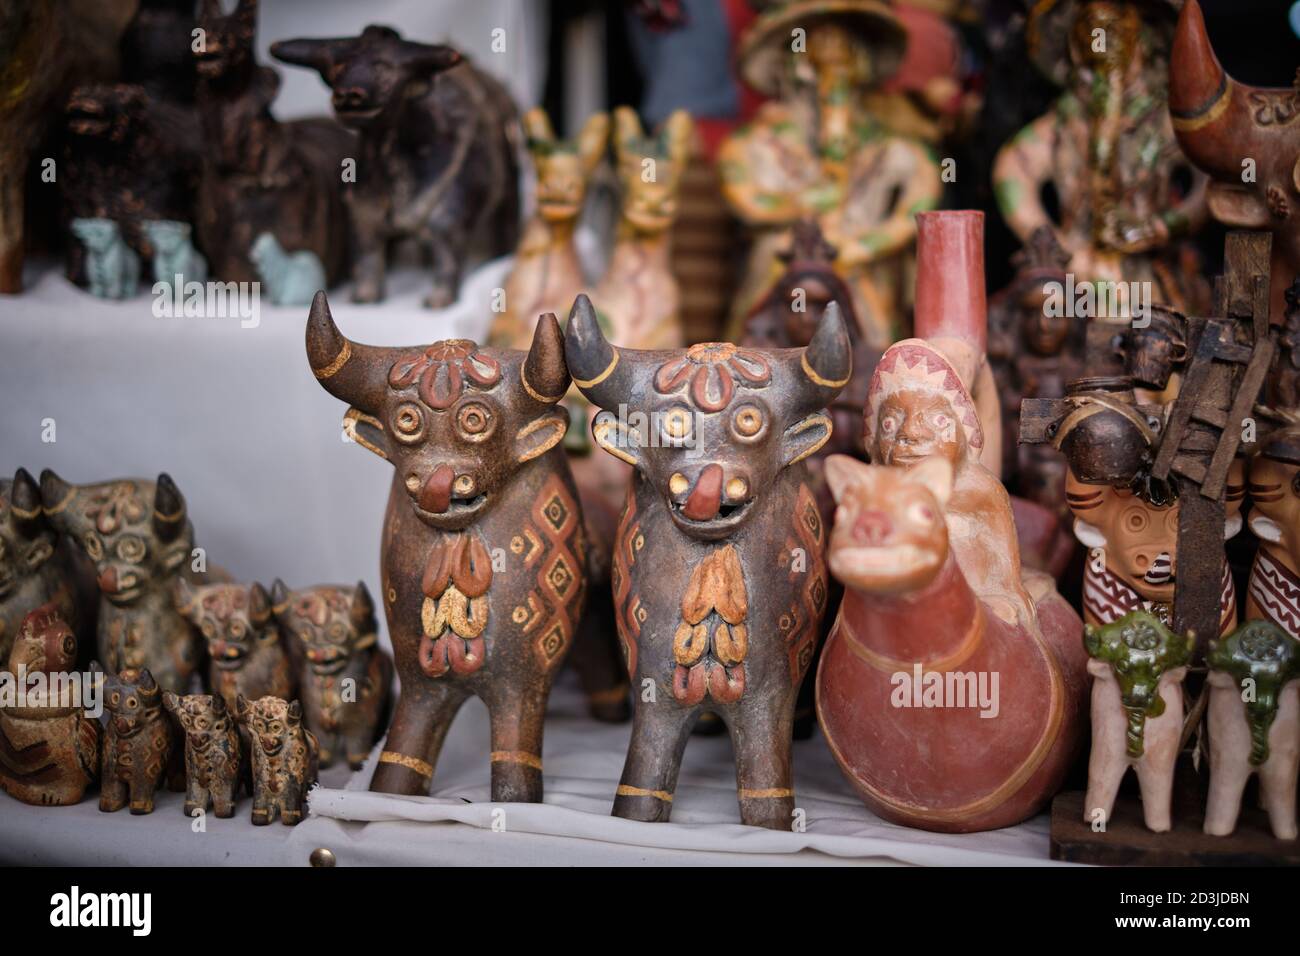 Two model bulls symbolising protection of the home in Incan or Peruvian symbolism Stock Photo